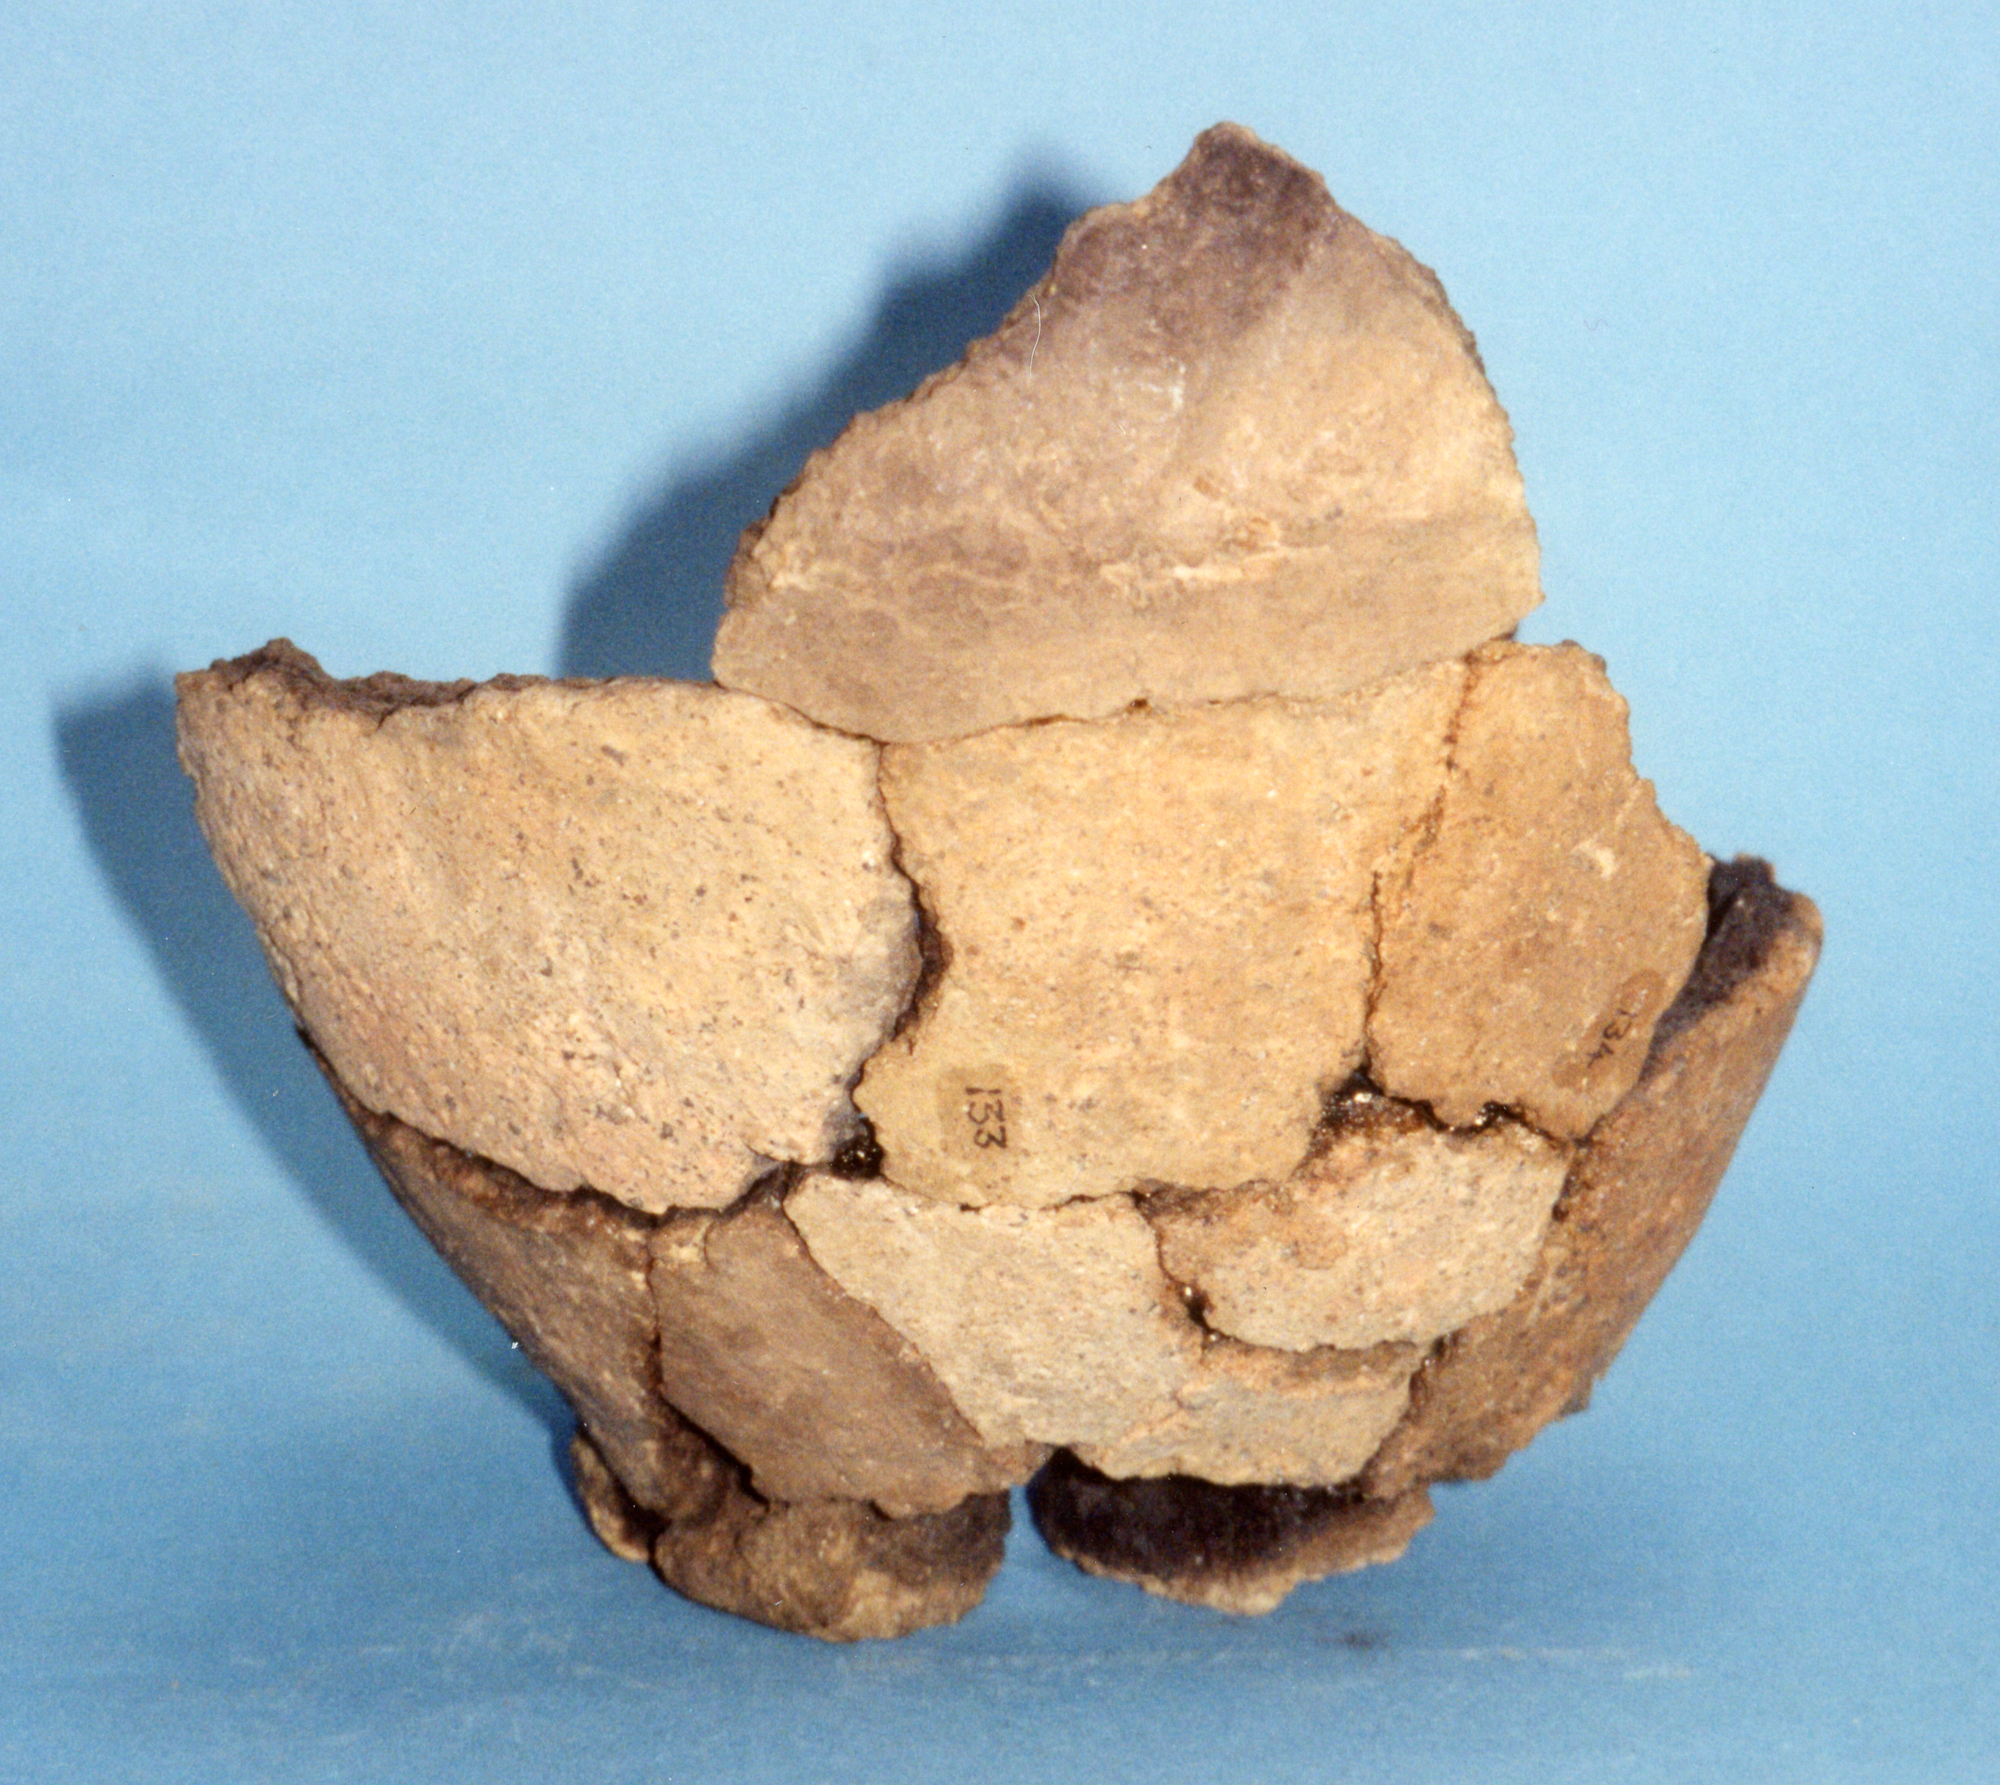 Image of Pottery / bipartite vessel / rim / base / body / sherd, from Ardnave, Islay, Argyll © National Museums Scotland